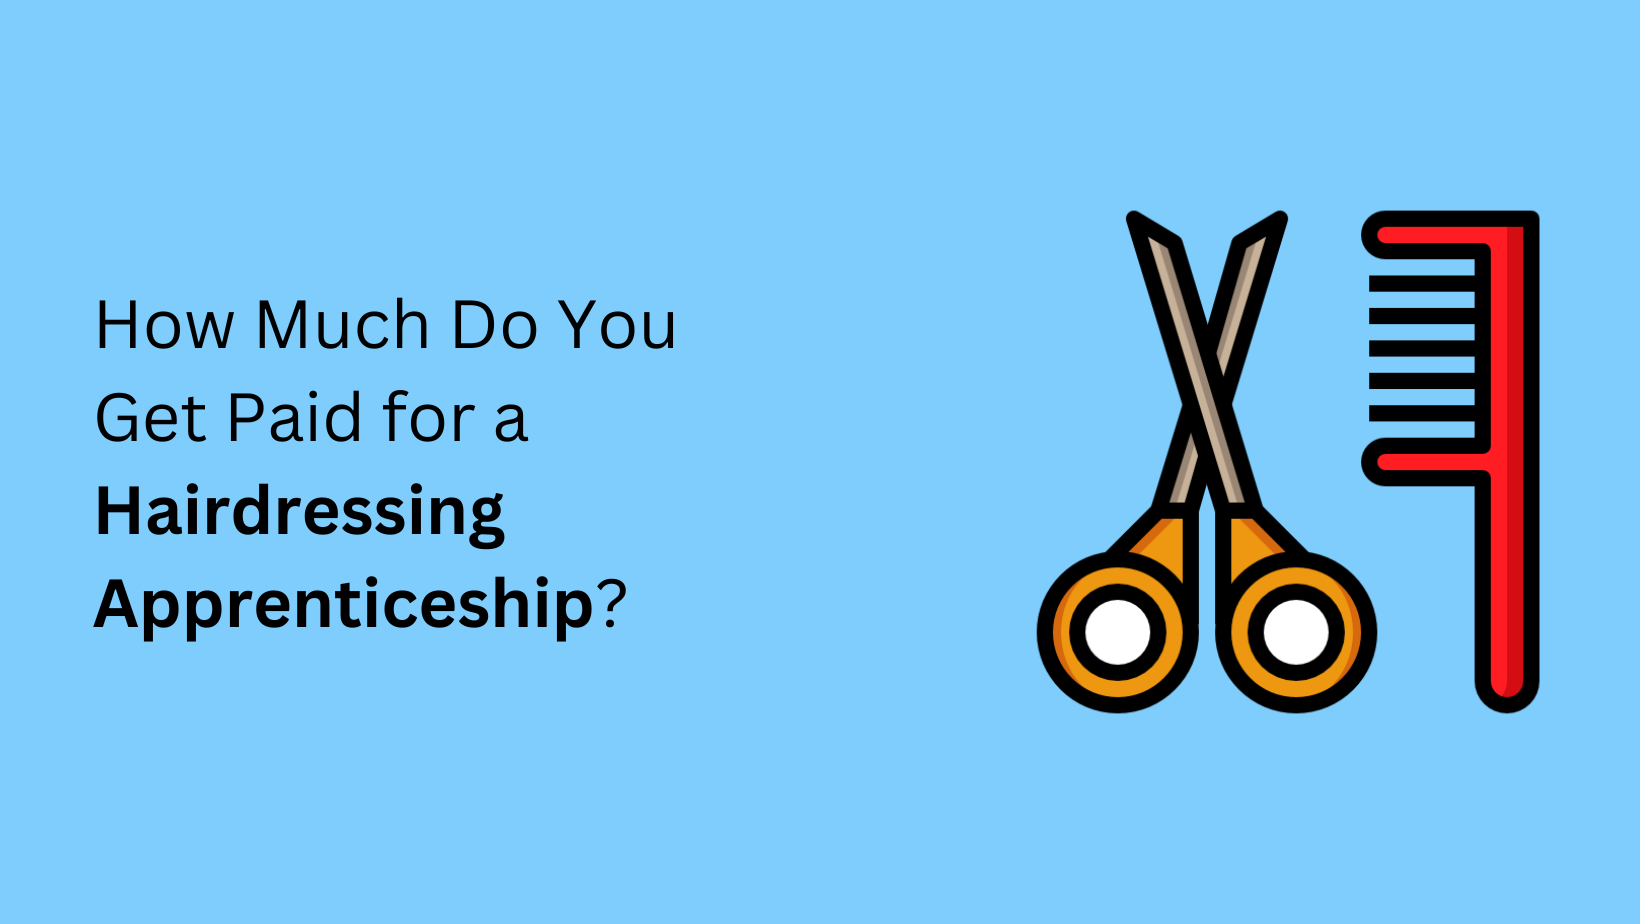 How Much Do You Get Paid for a Hairdressing Apprenticeship